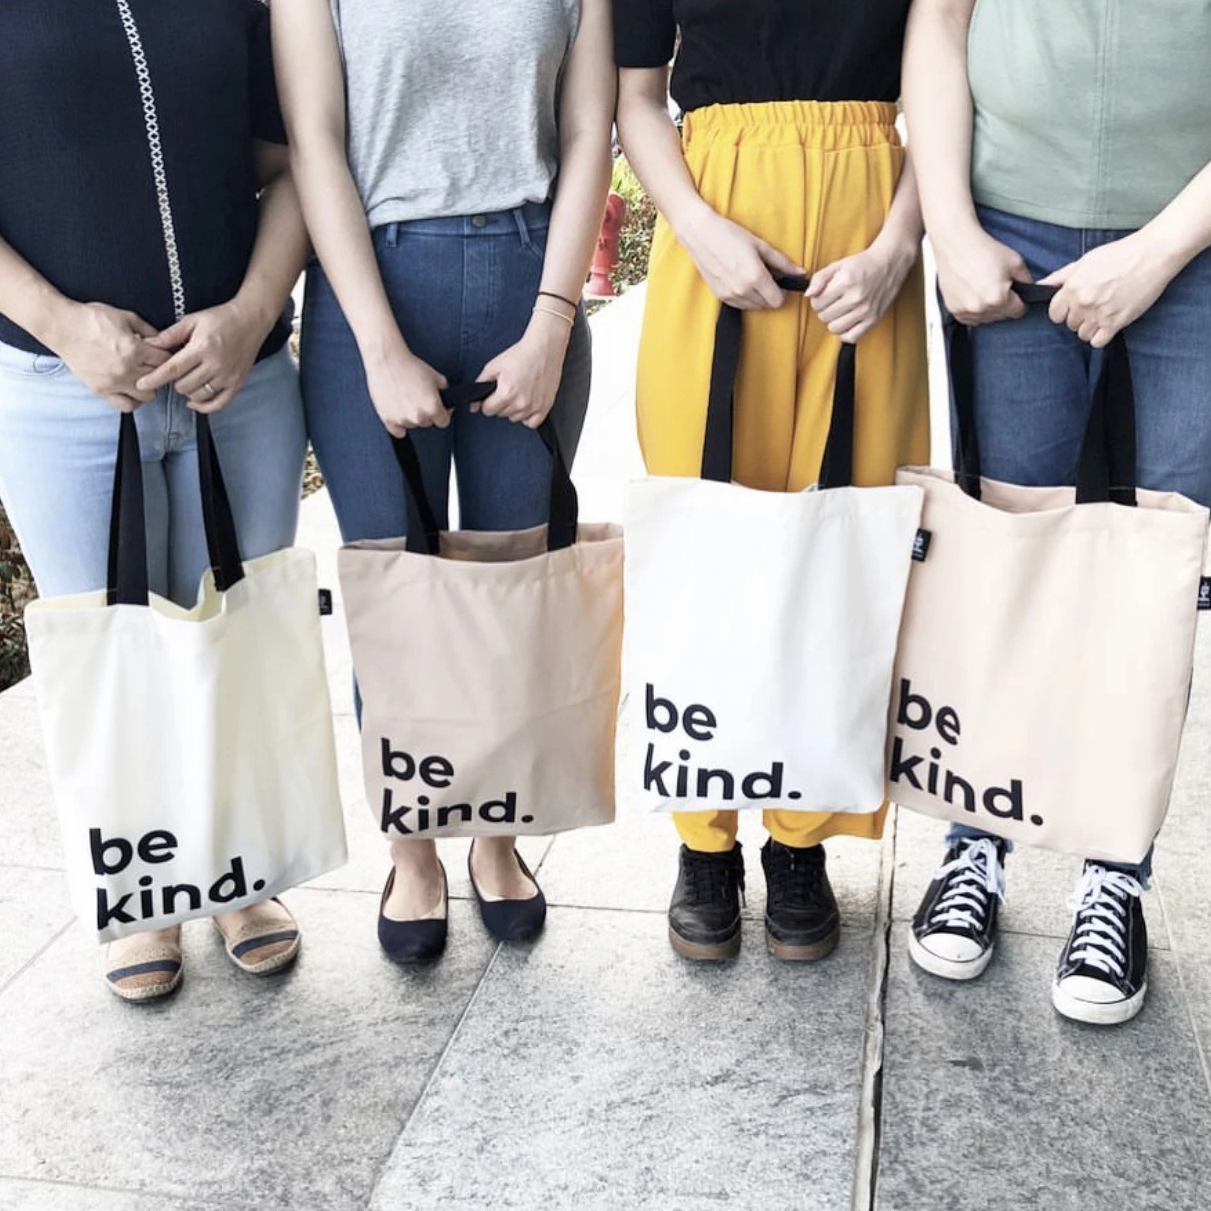 "Be Kind" - Upcycled Tote Bag